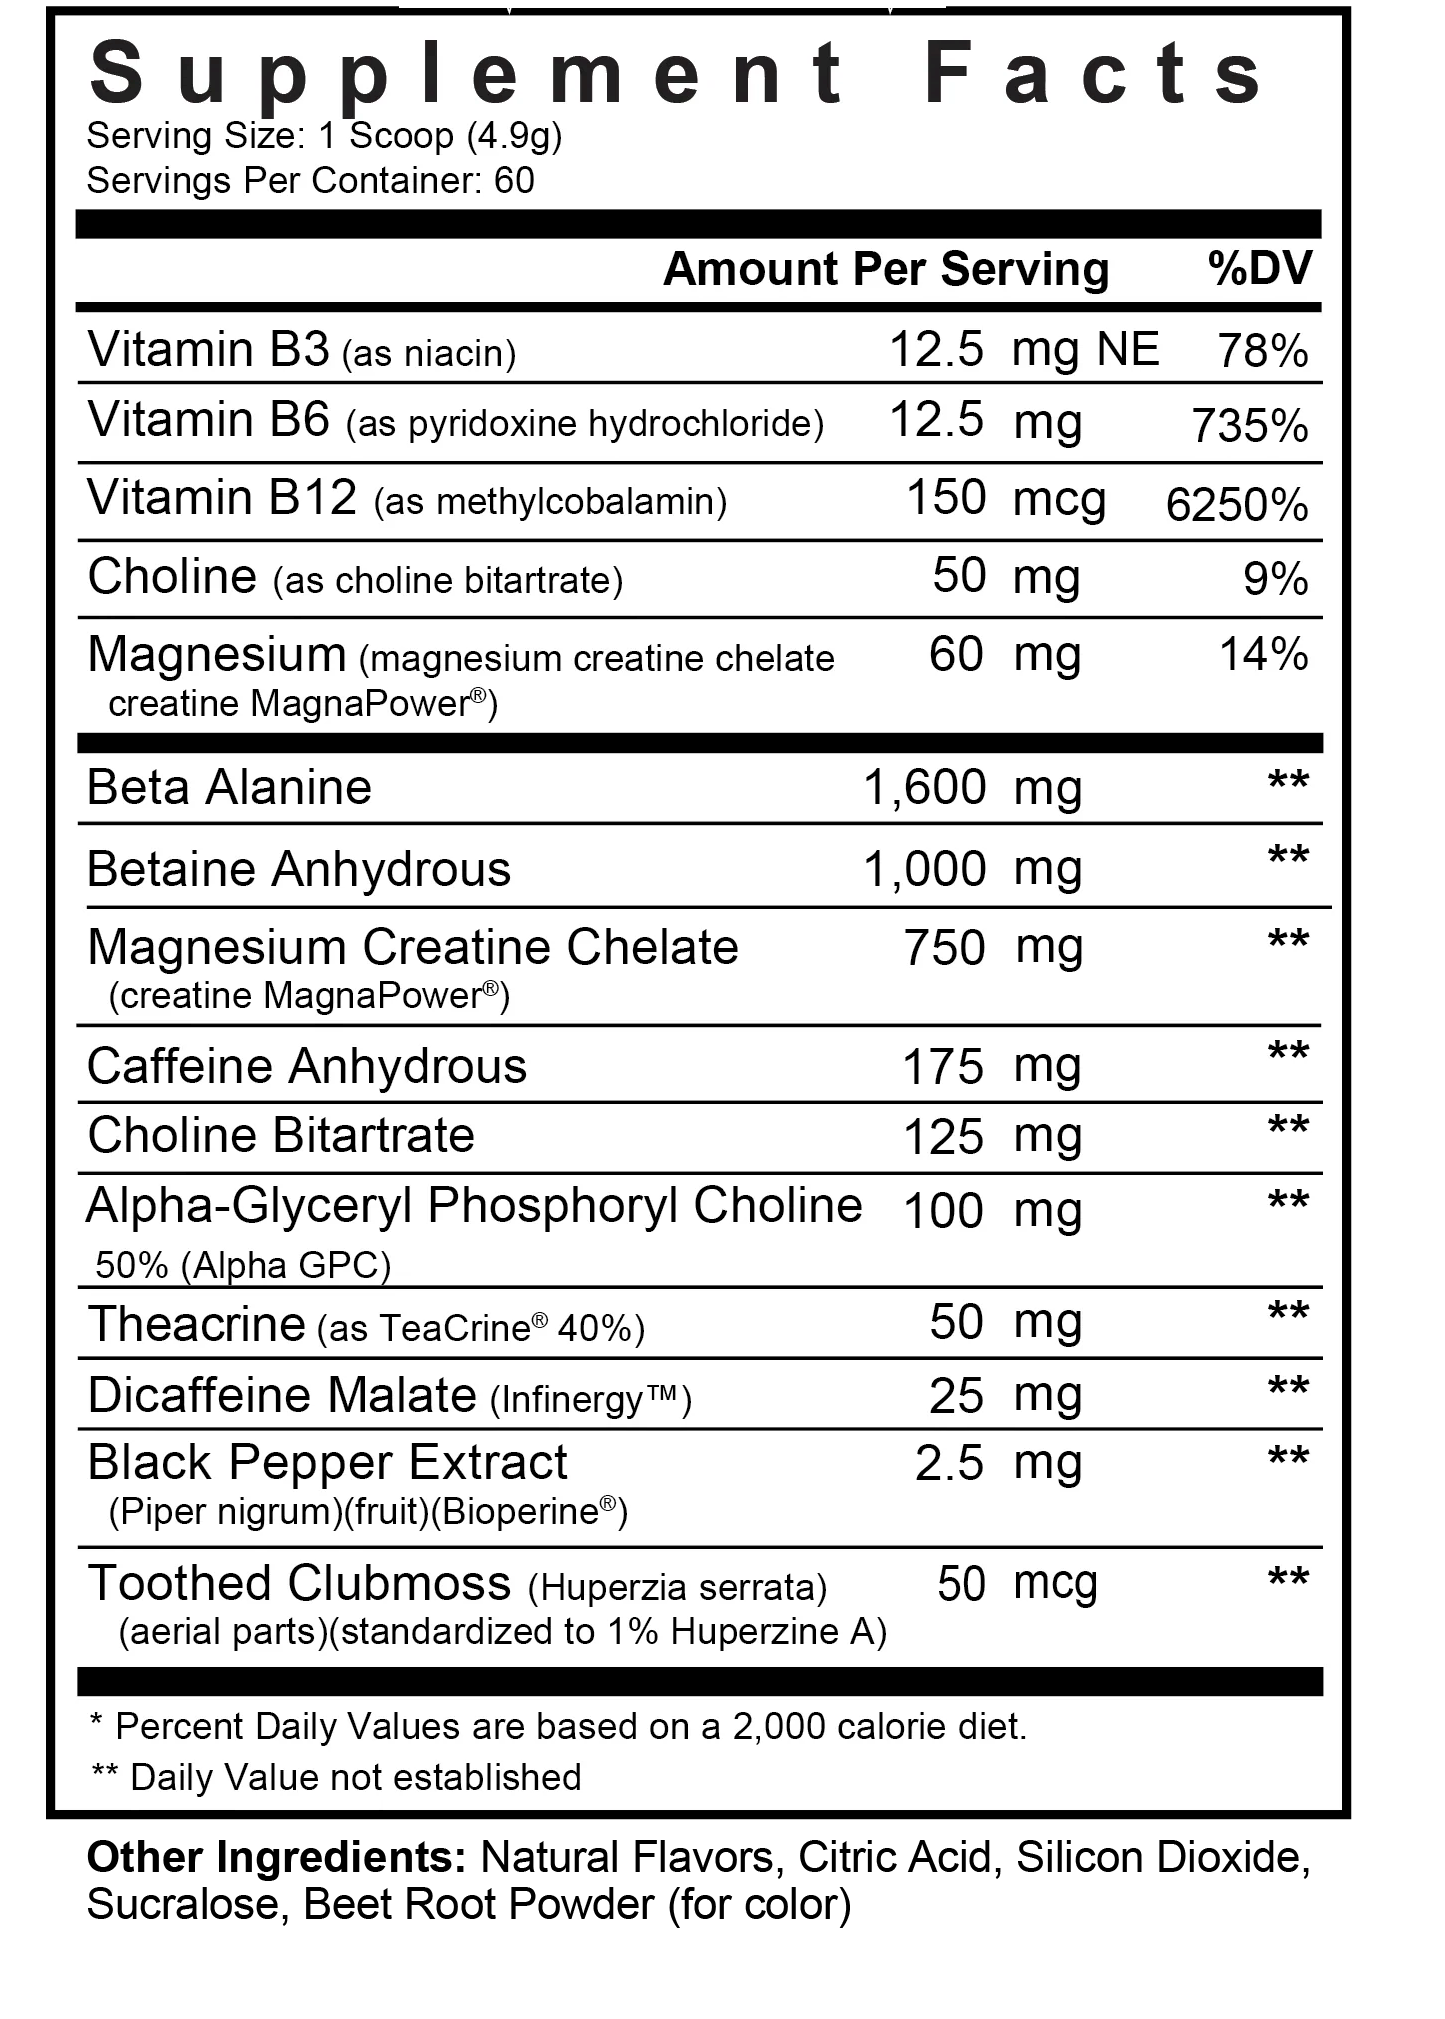 Supplement facts label showing daily values and ingredients like vitamins B3, B6, B12, Choline, Magnesium, Caffeine, Alpha GPC, and more.